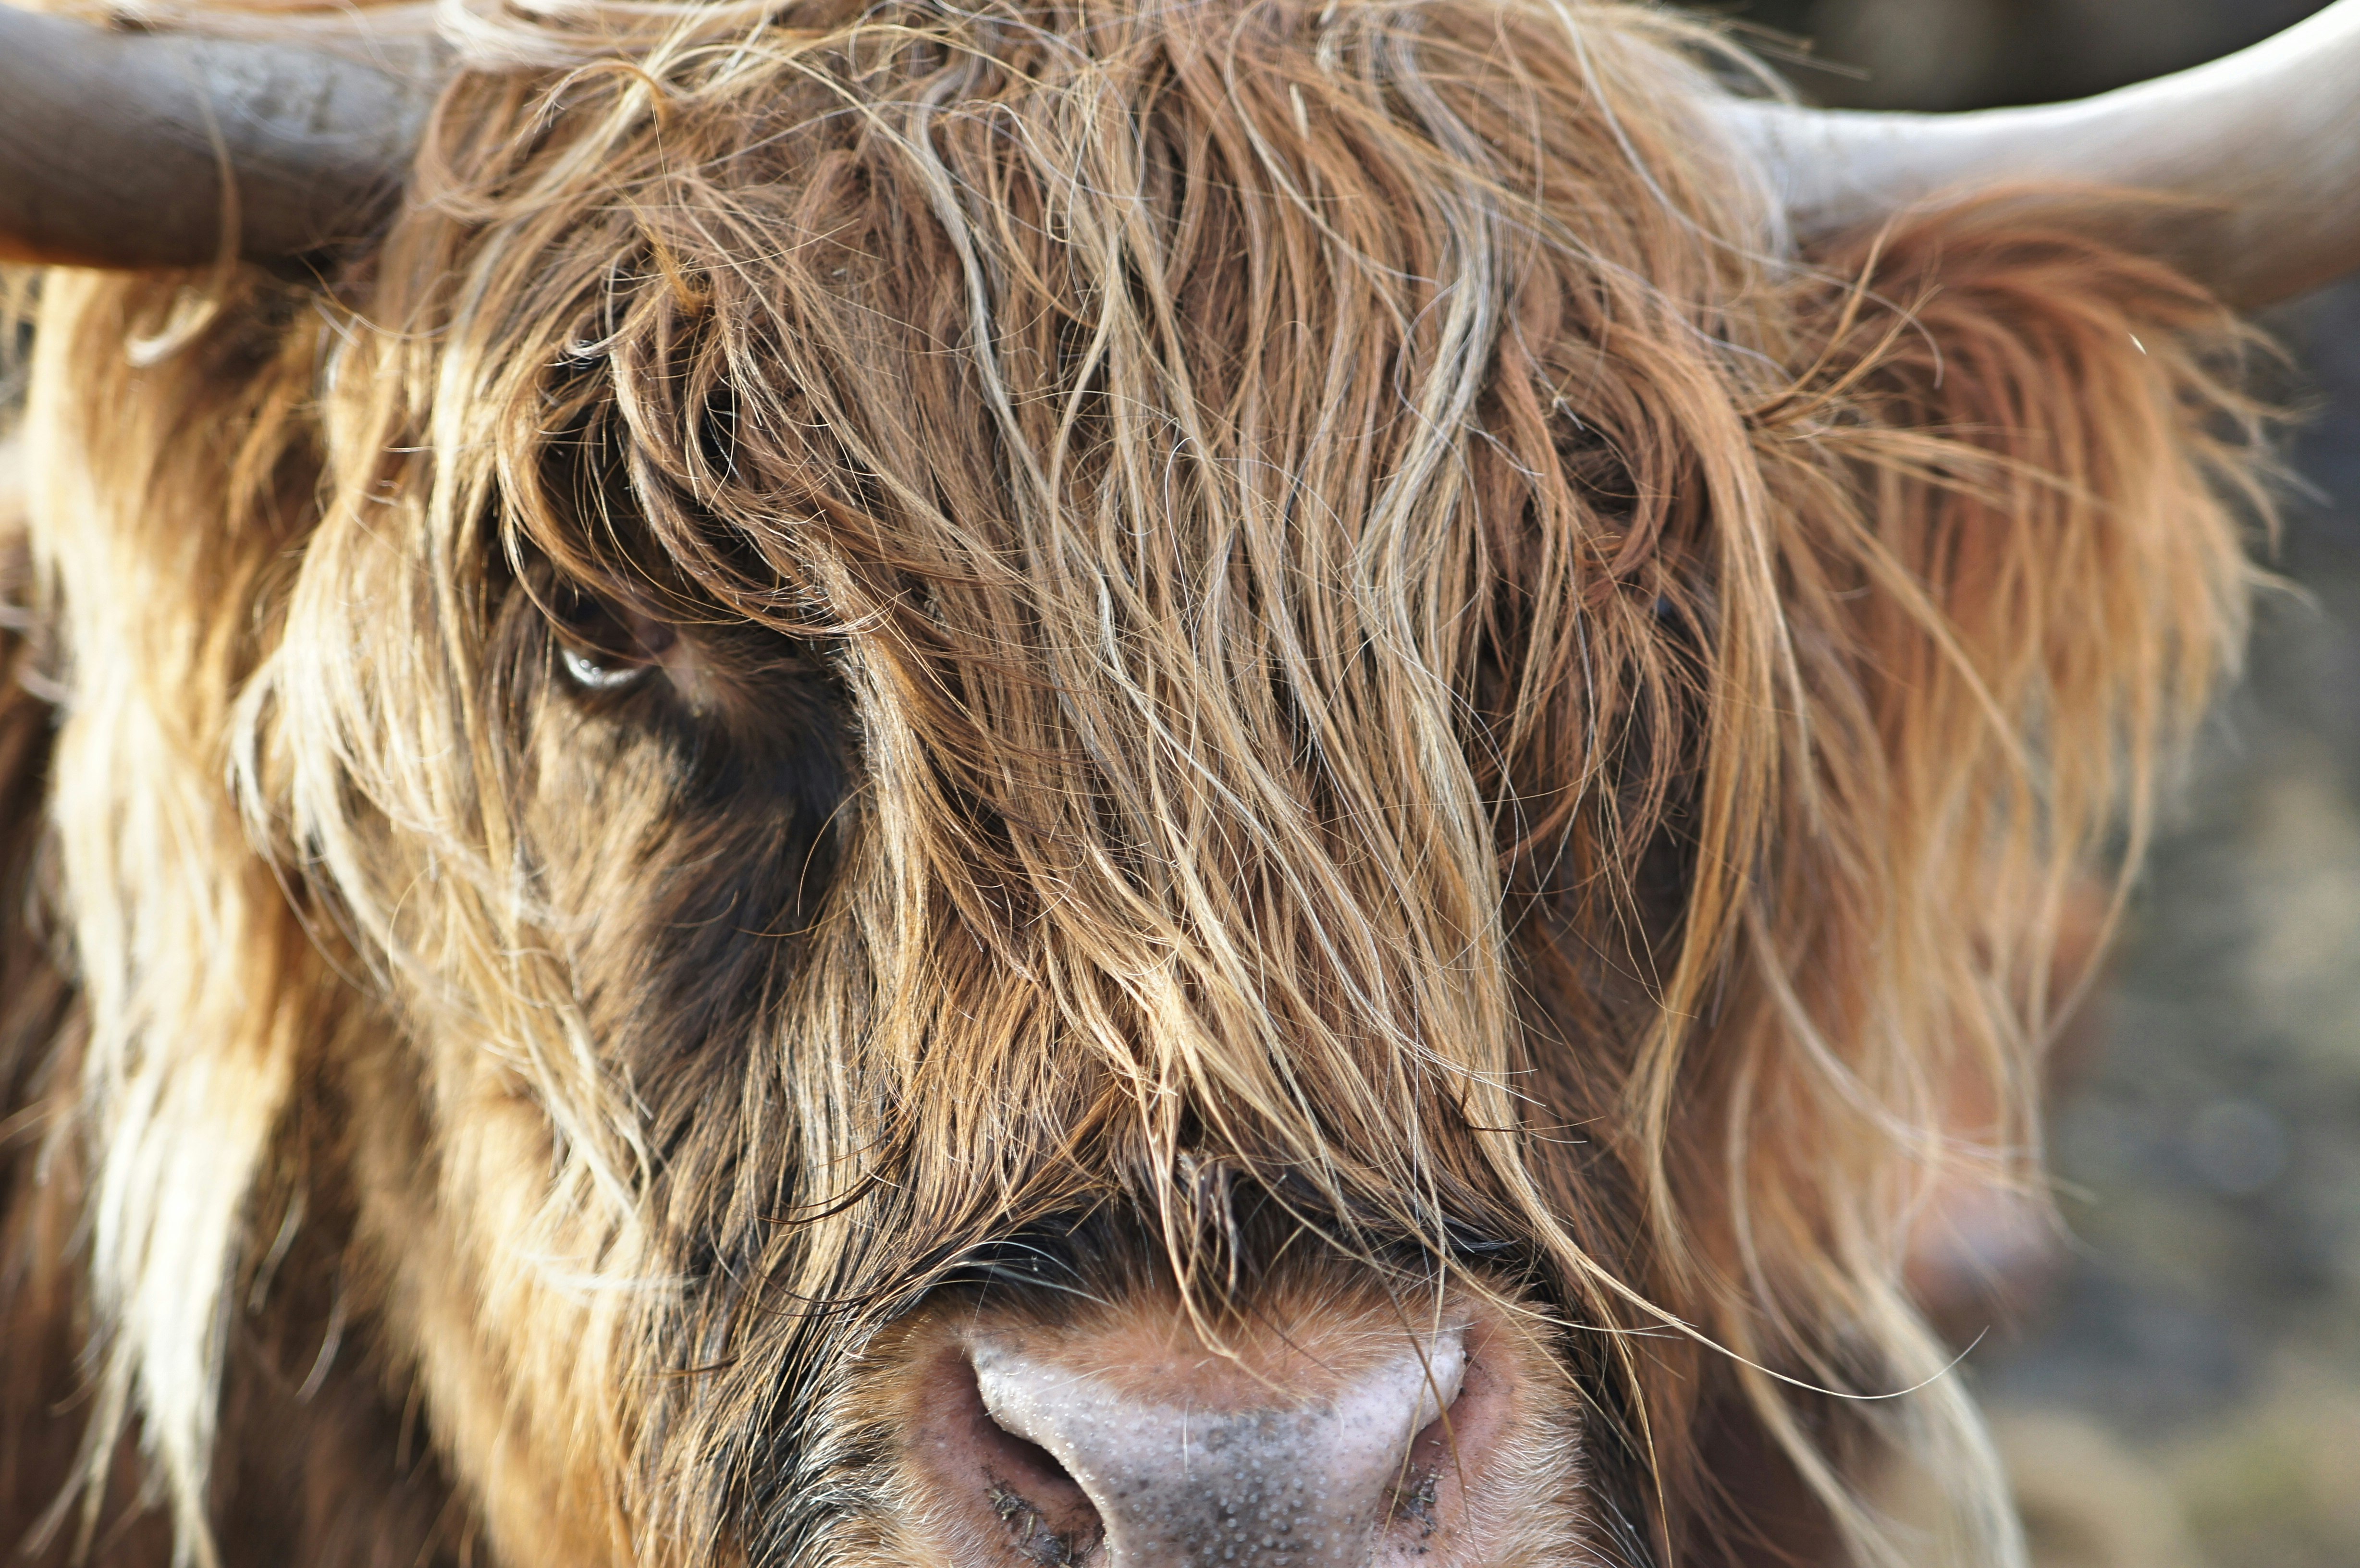 We’ve been staying on the Isle of Skye for a few months now. We always saw images of these long haired cows, but never encountered them. During a drive we finally saw them. We got out of the car, slowly approached them. They really did not care. They were not afraid at all. That’s why we could take this nice close up portrait of one of them.